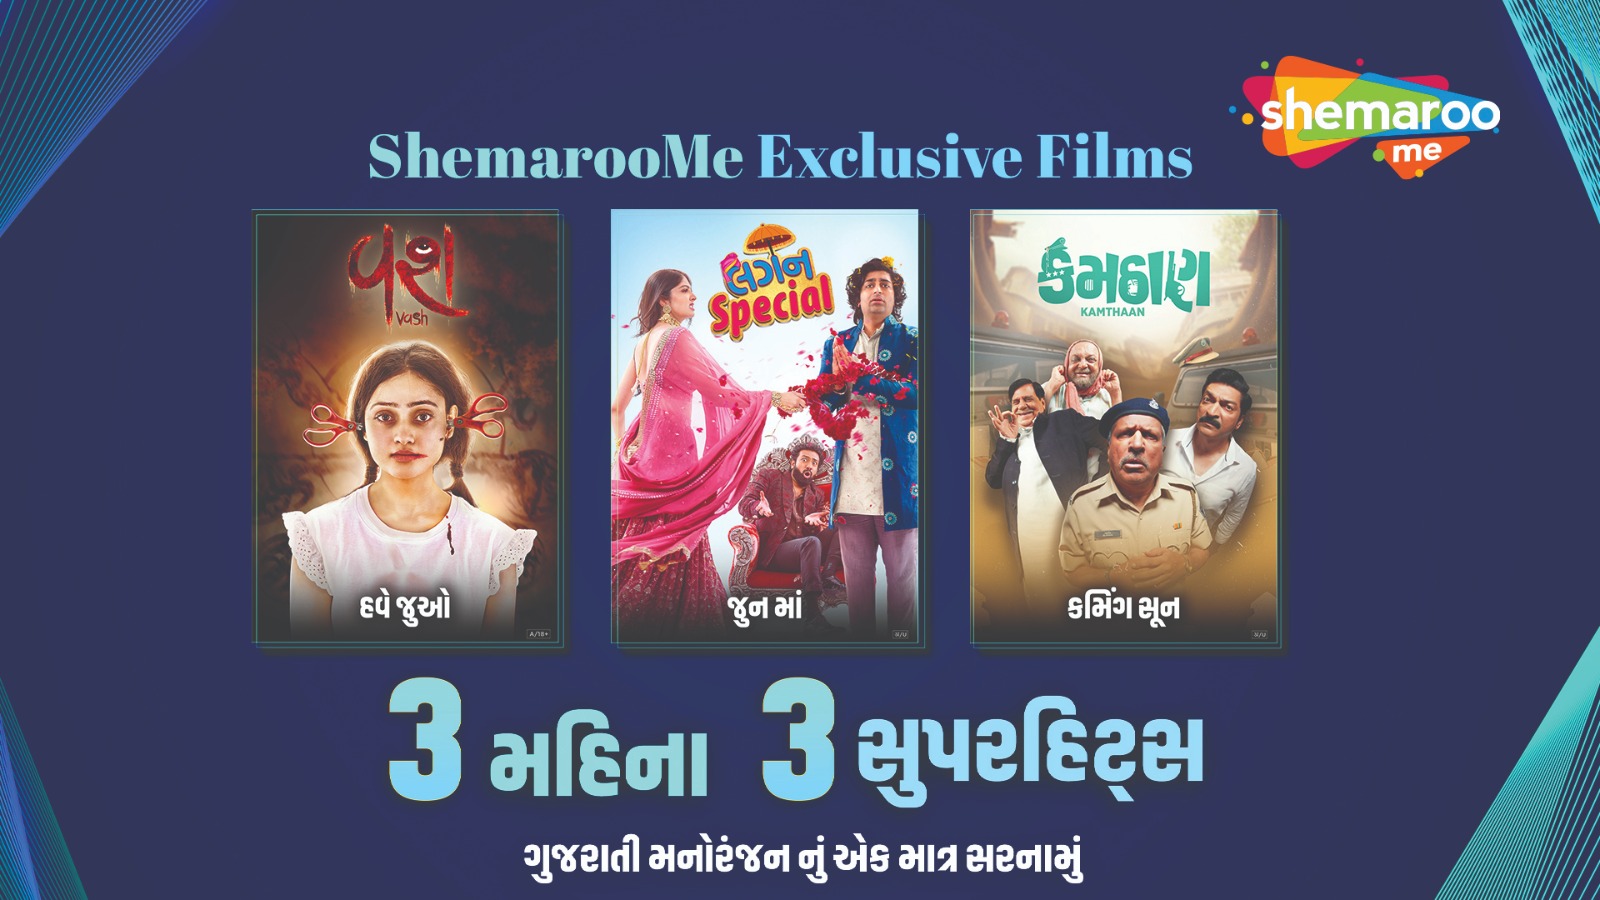 Best of Gujarati entertainment available on ShemarooMe, this summer!